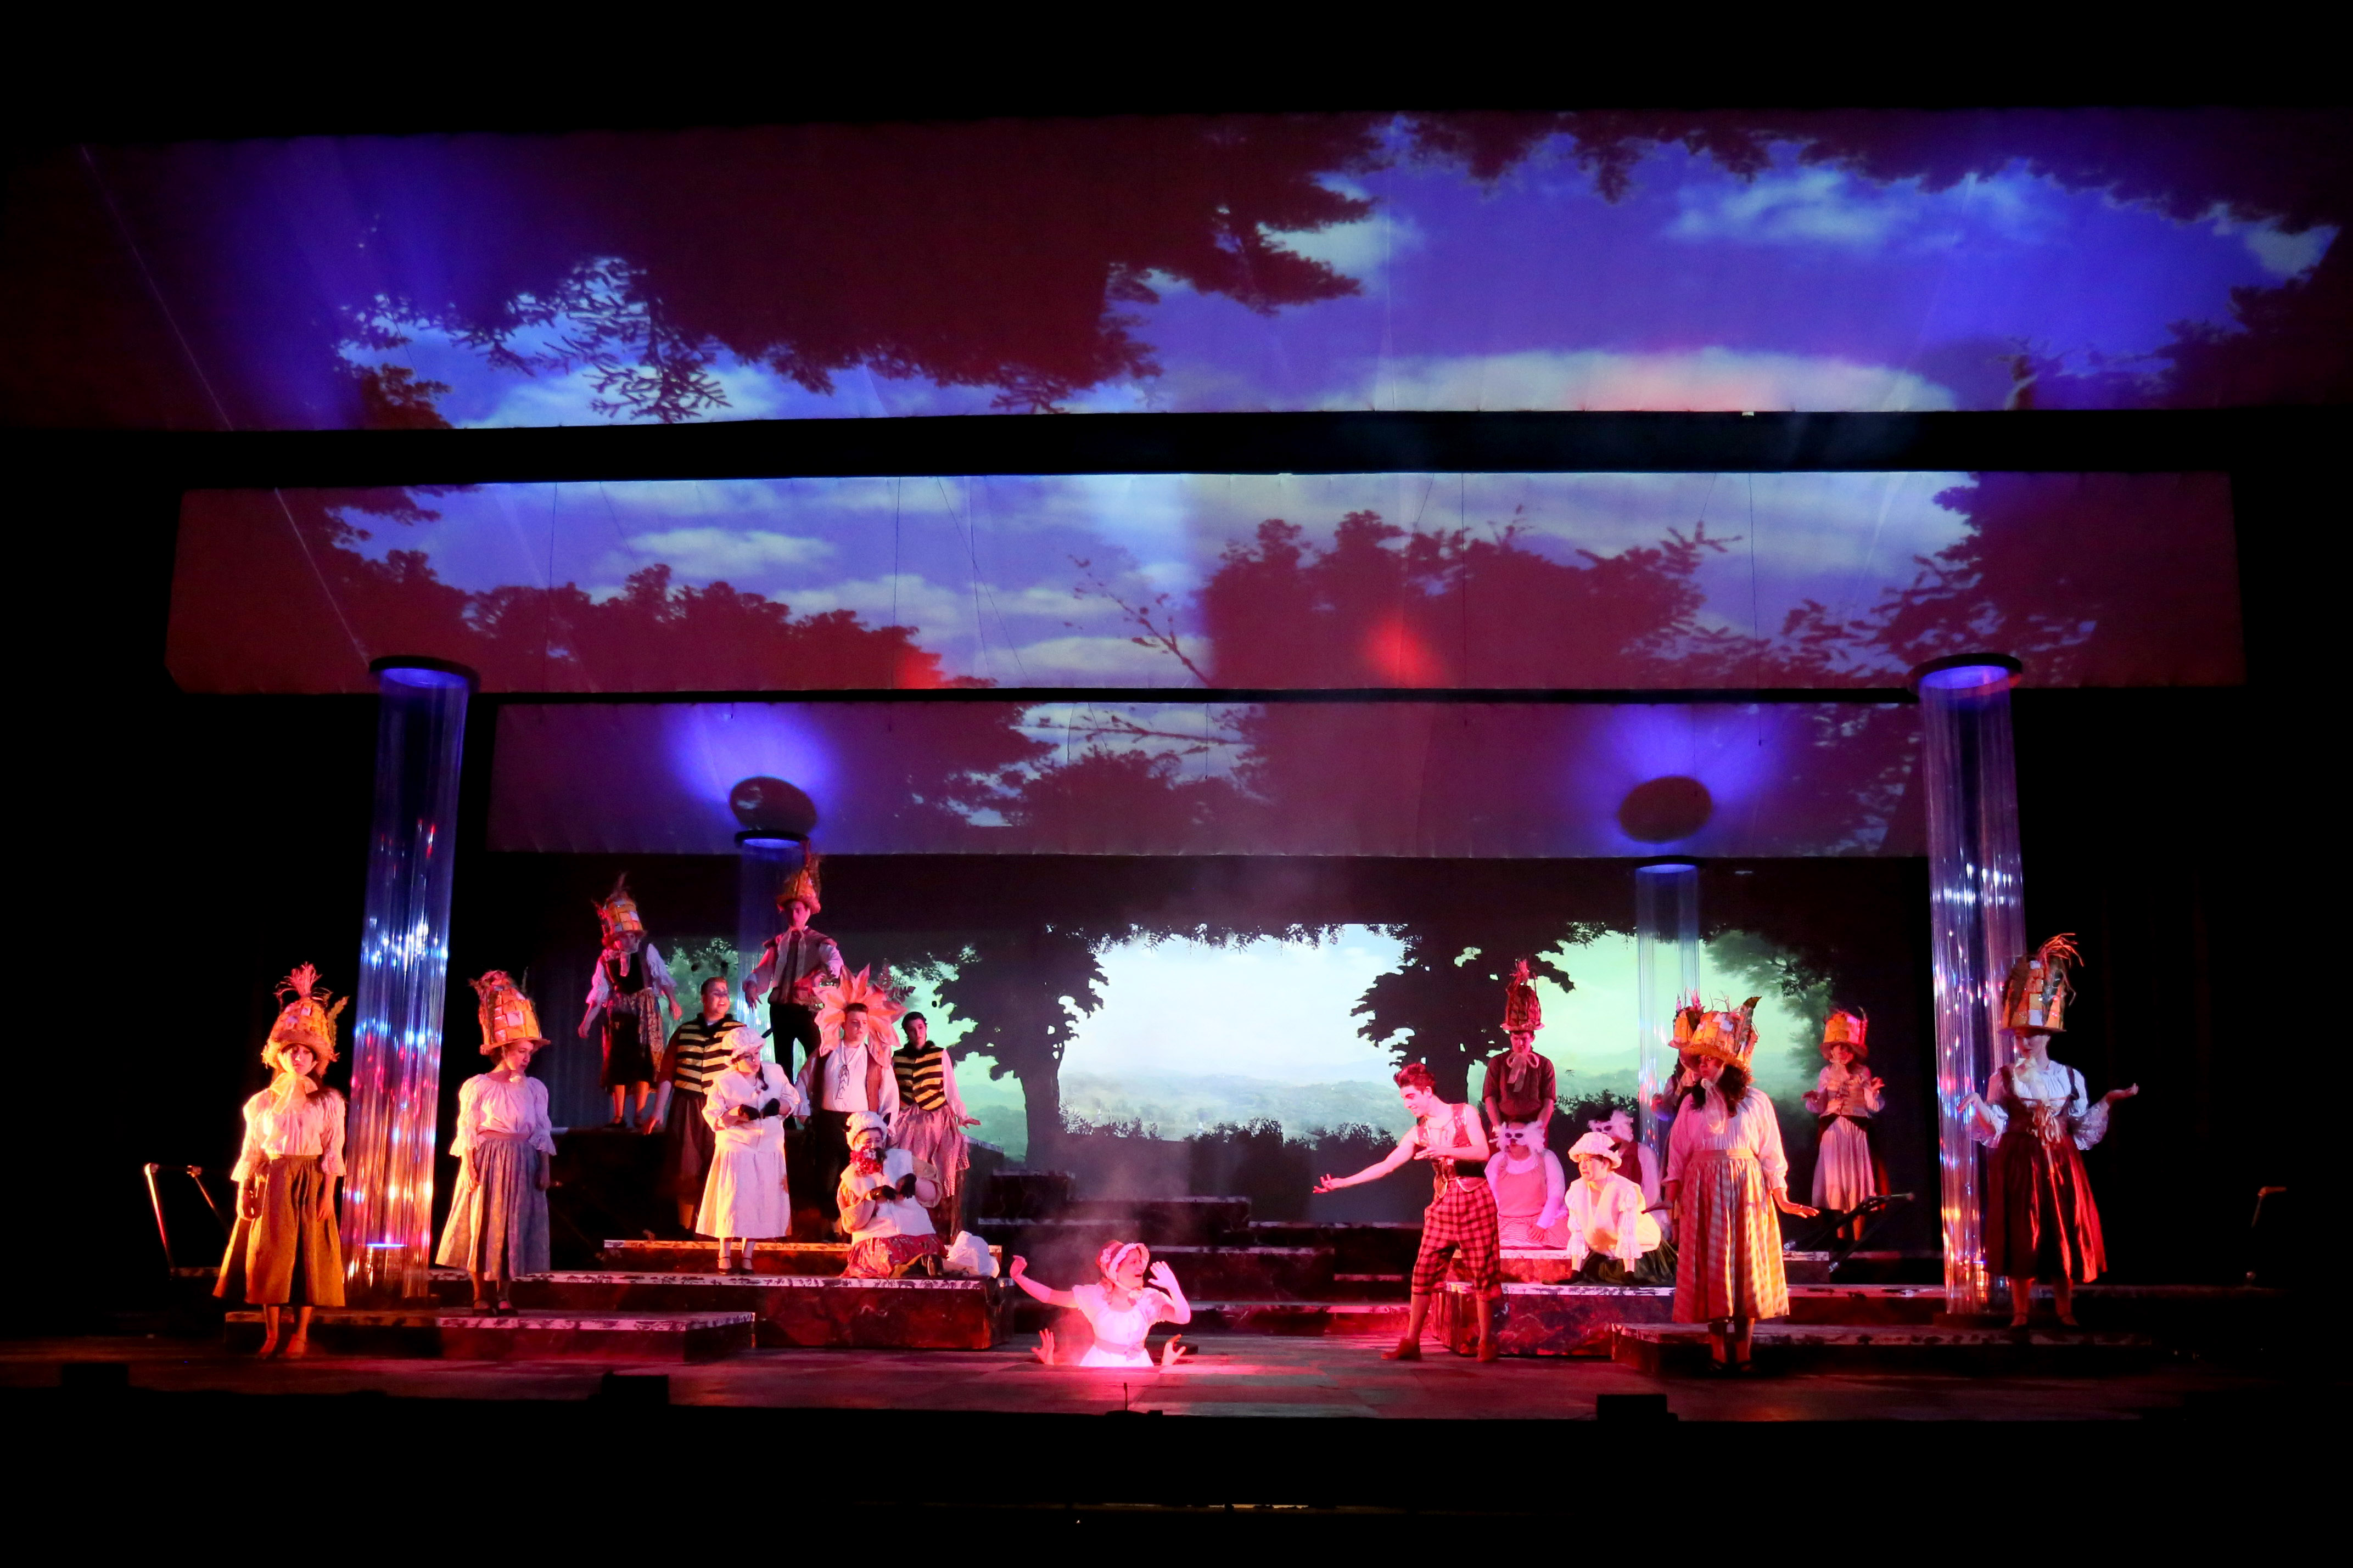 Projections on Stage Part II: Making Good Use of Ordinary Projectors